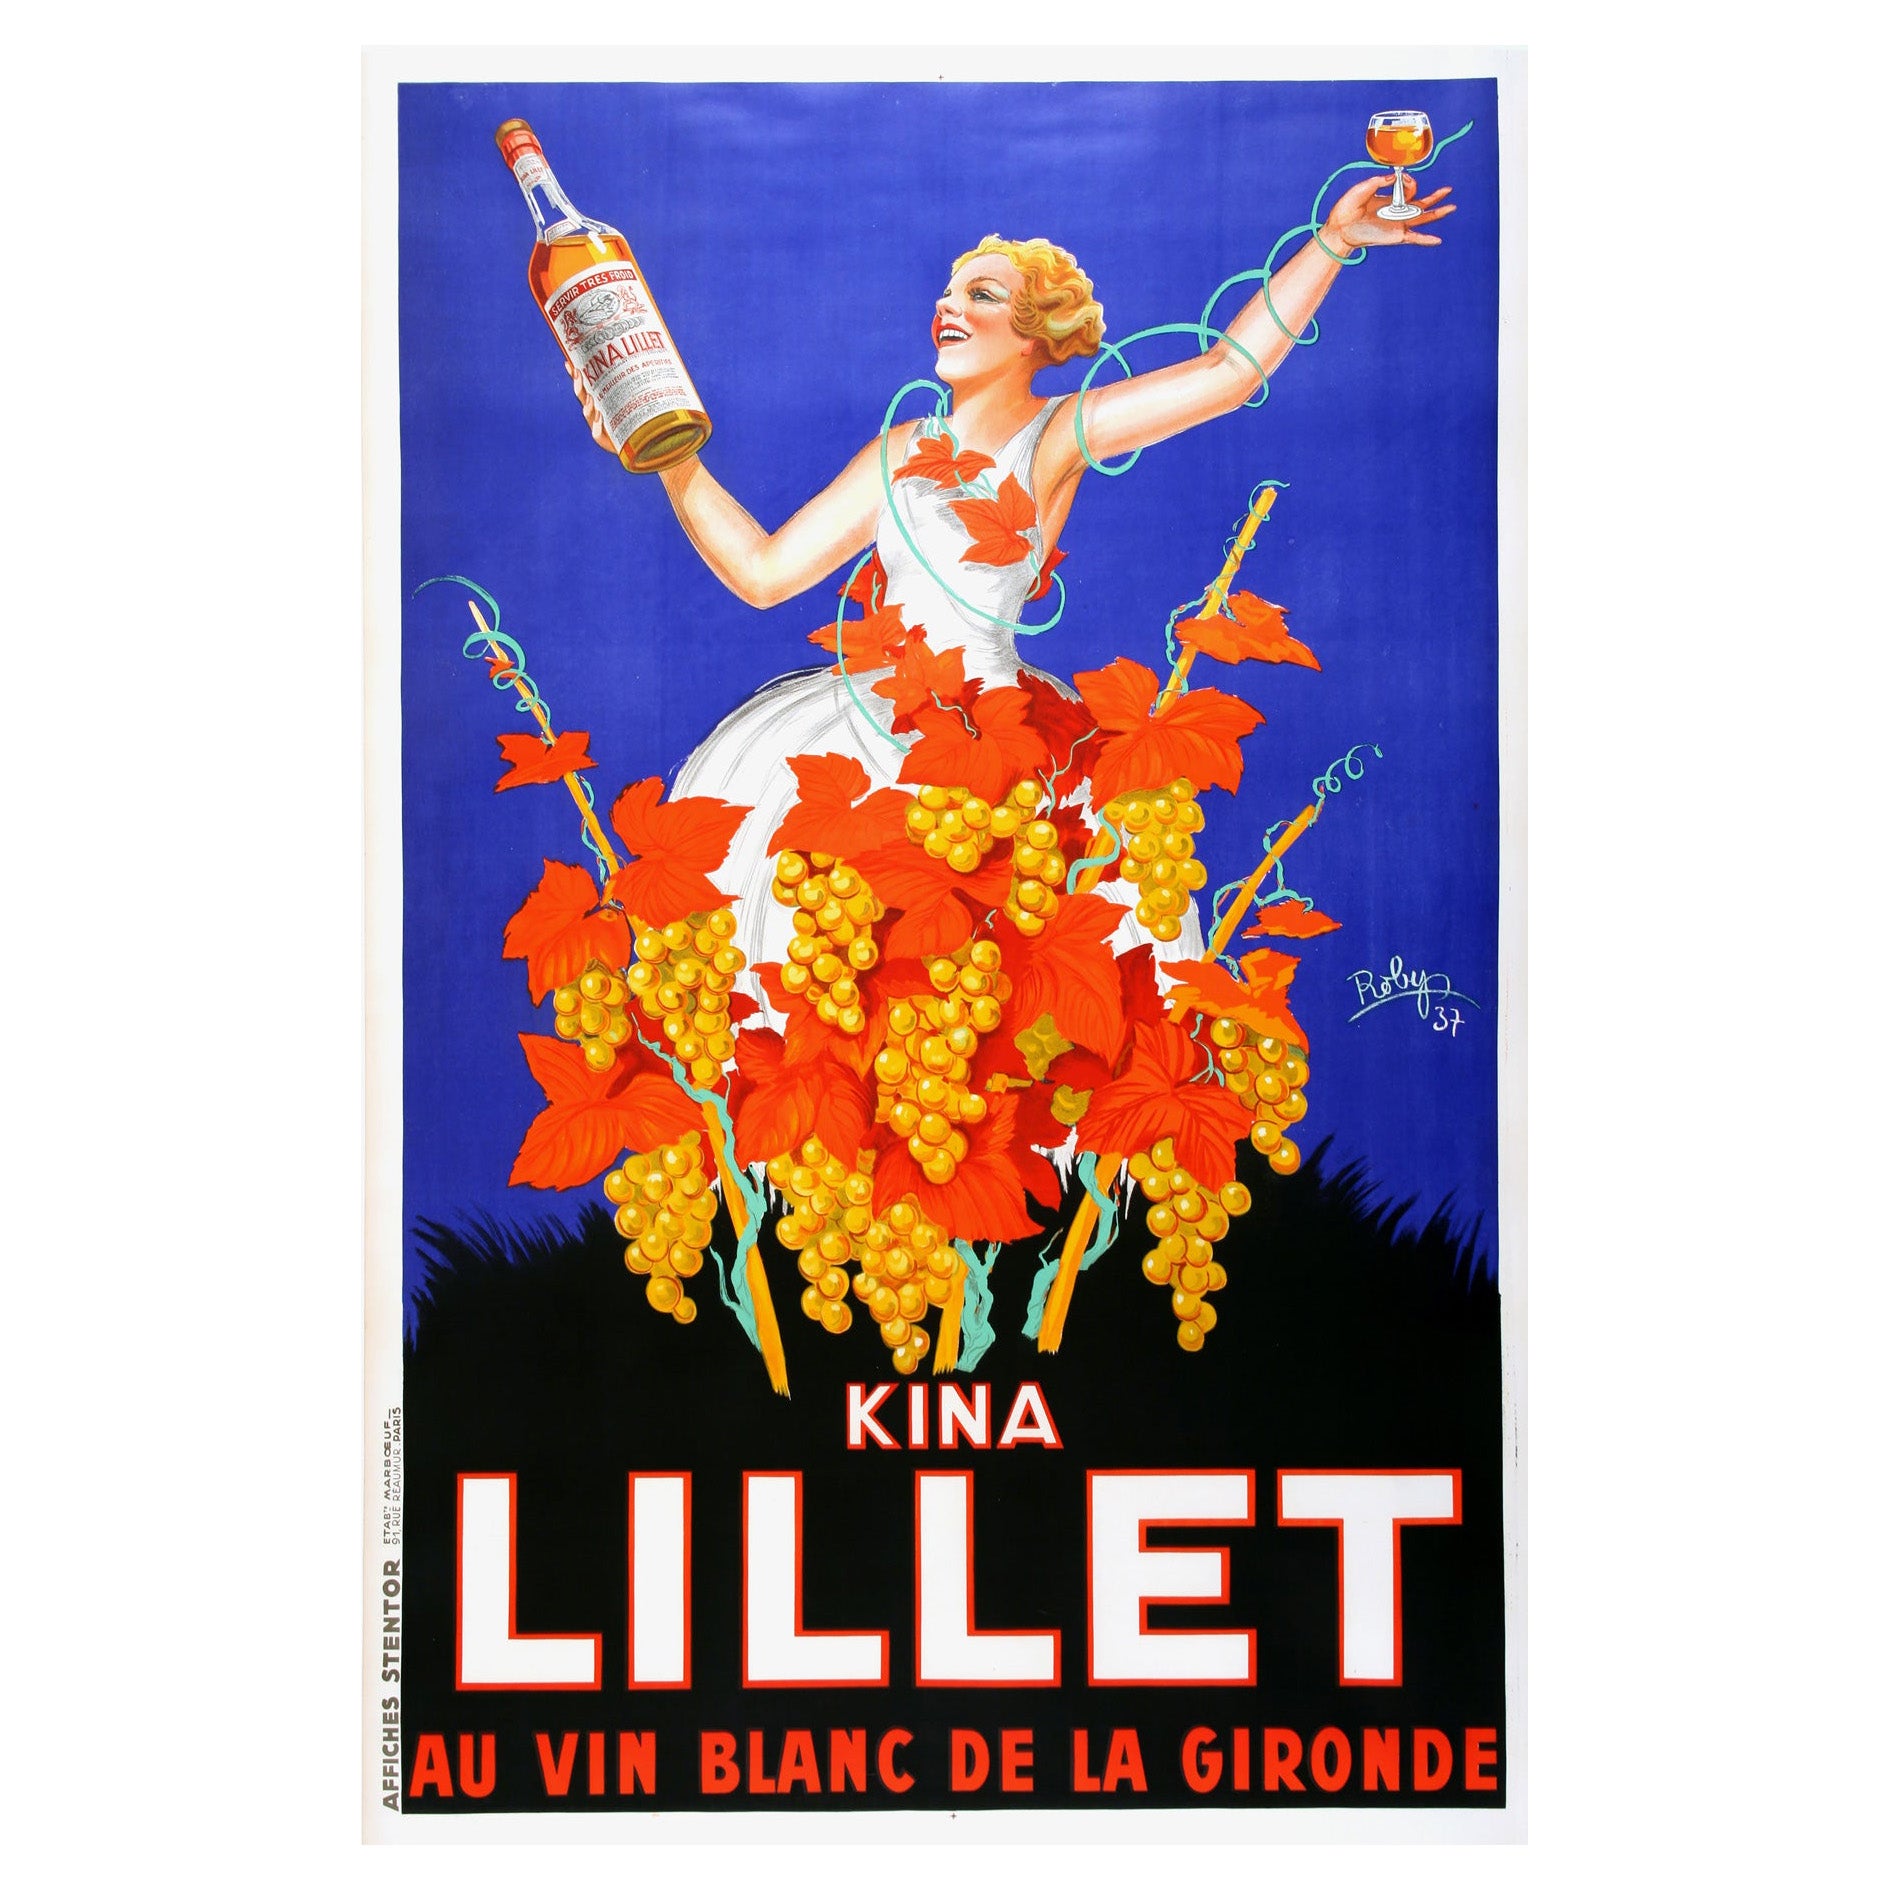 Kina Lillet, 1937 Vintage French Alcohol Advertising Poster, Robys